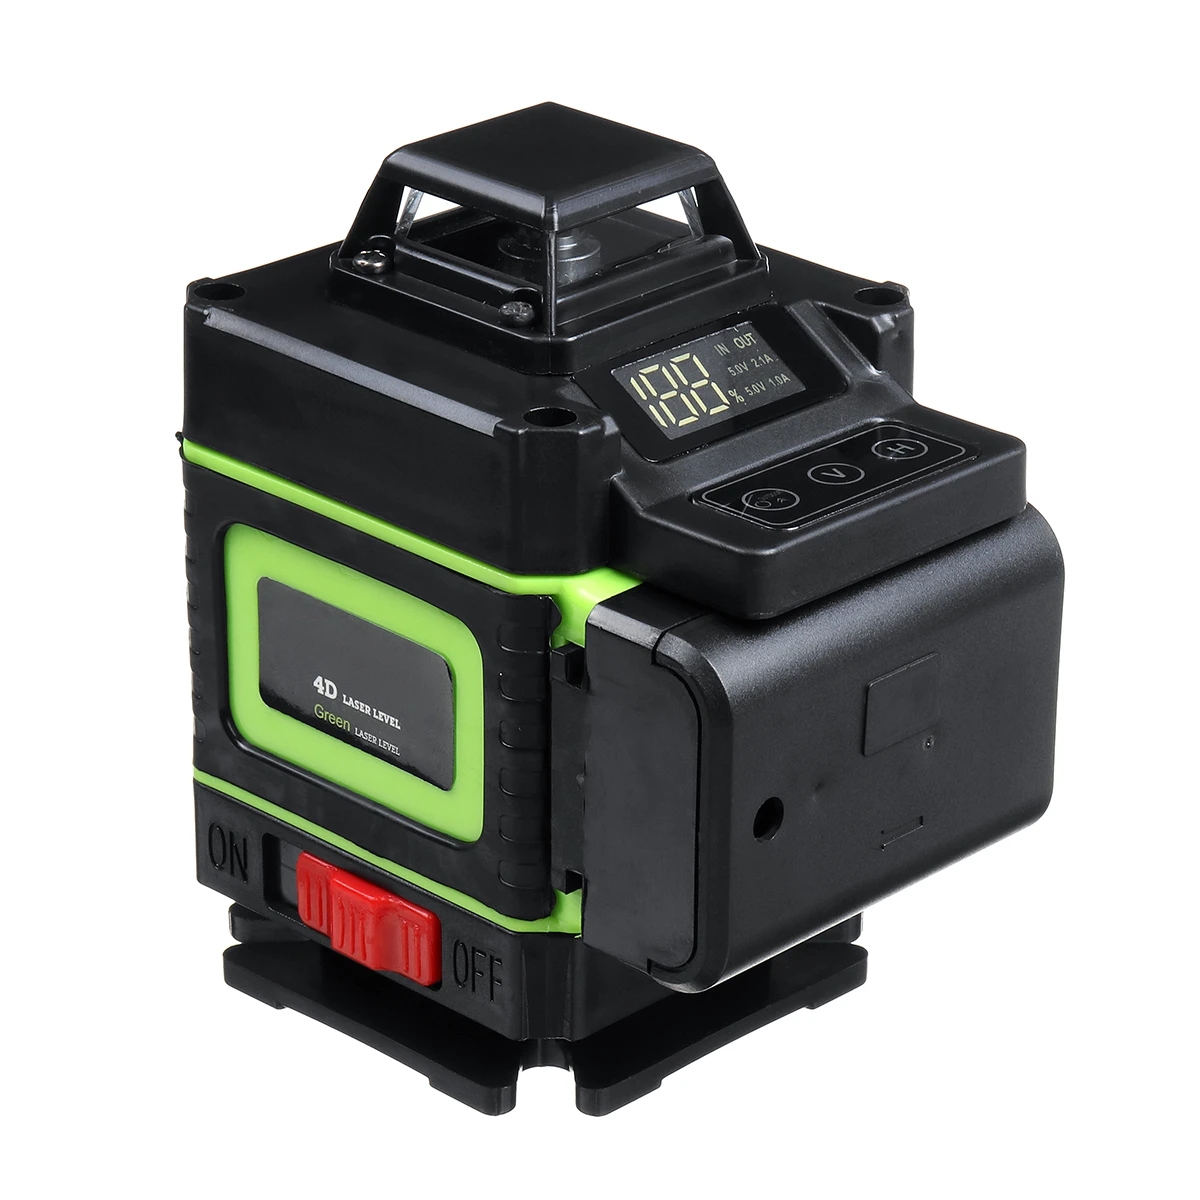 16-Line-Strong-Green-Light-3D-Remote-Control-Laser-Level-Measure-with-Wall-Attachment-Frame-1853062-7